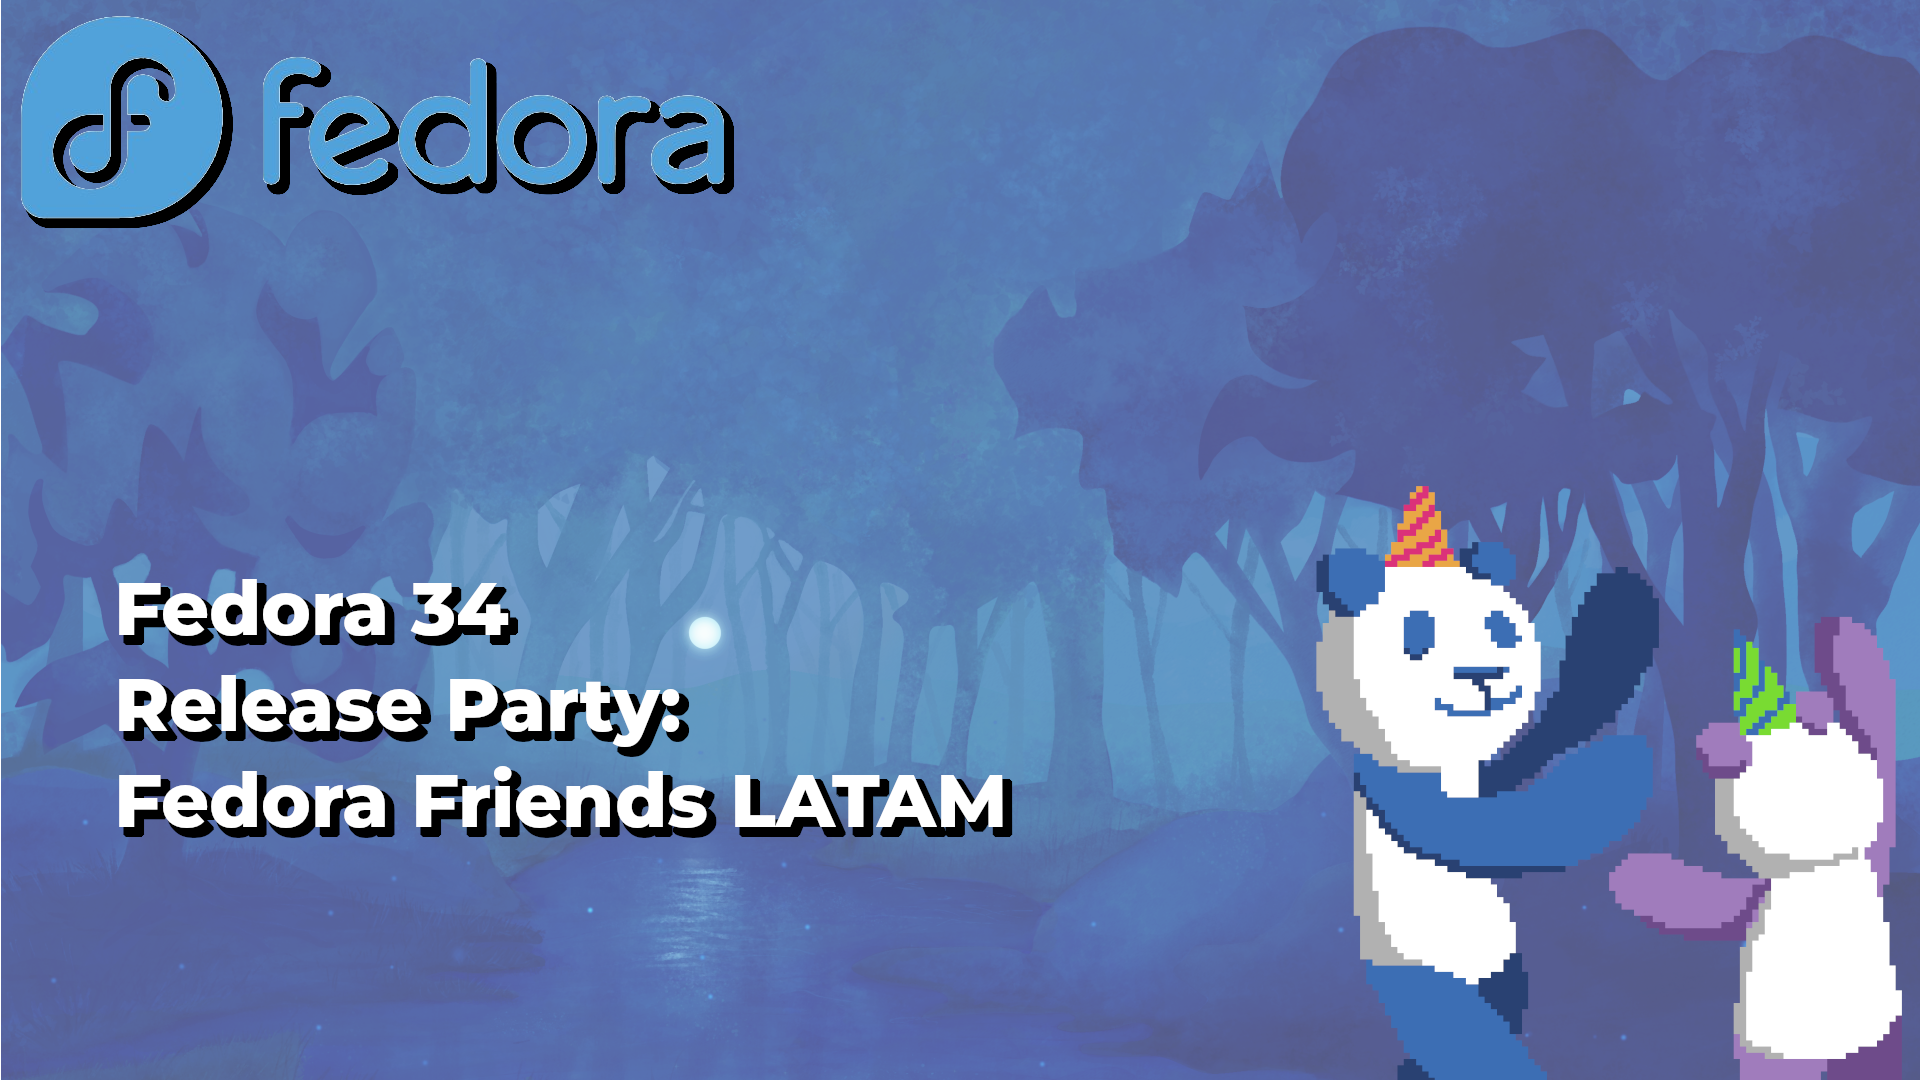 Fedora 34 Release Party